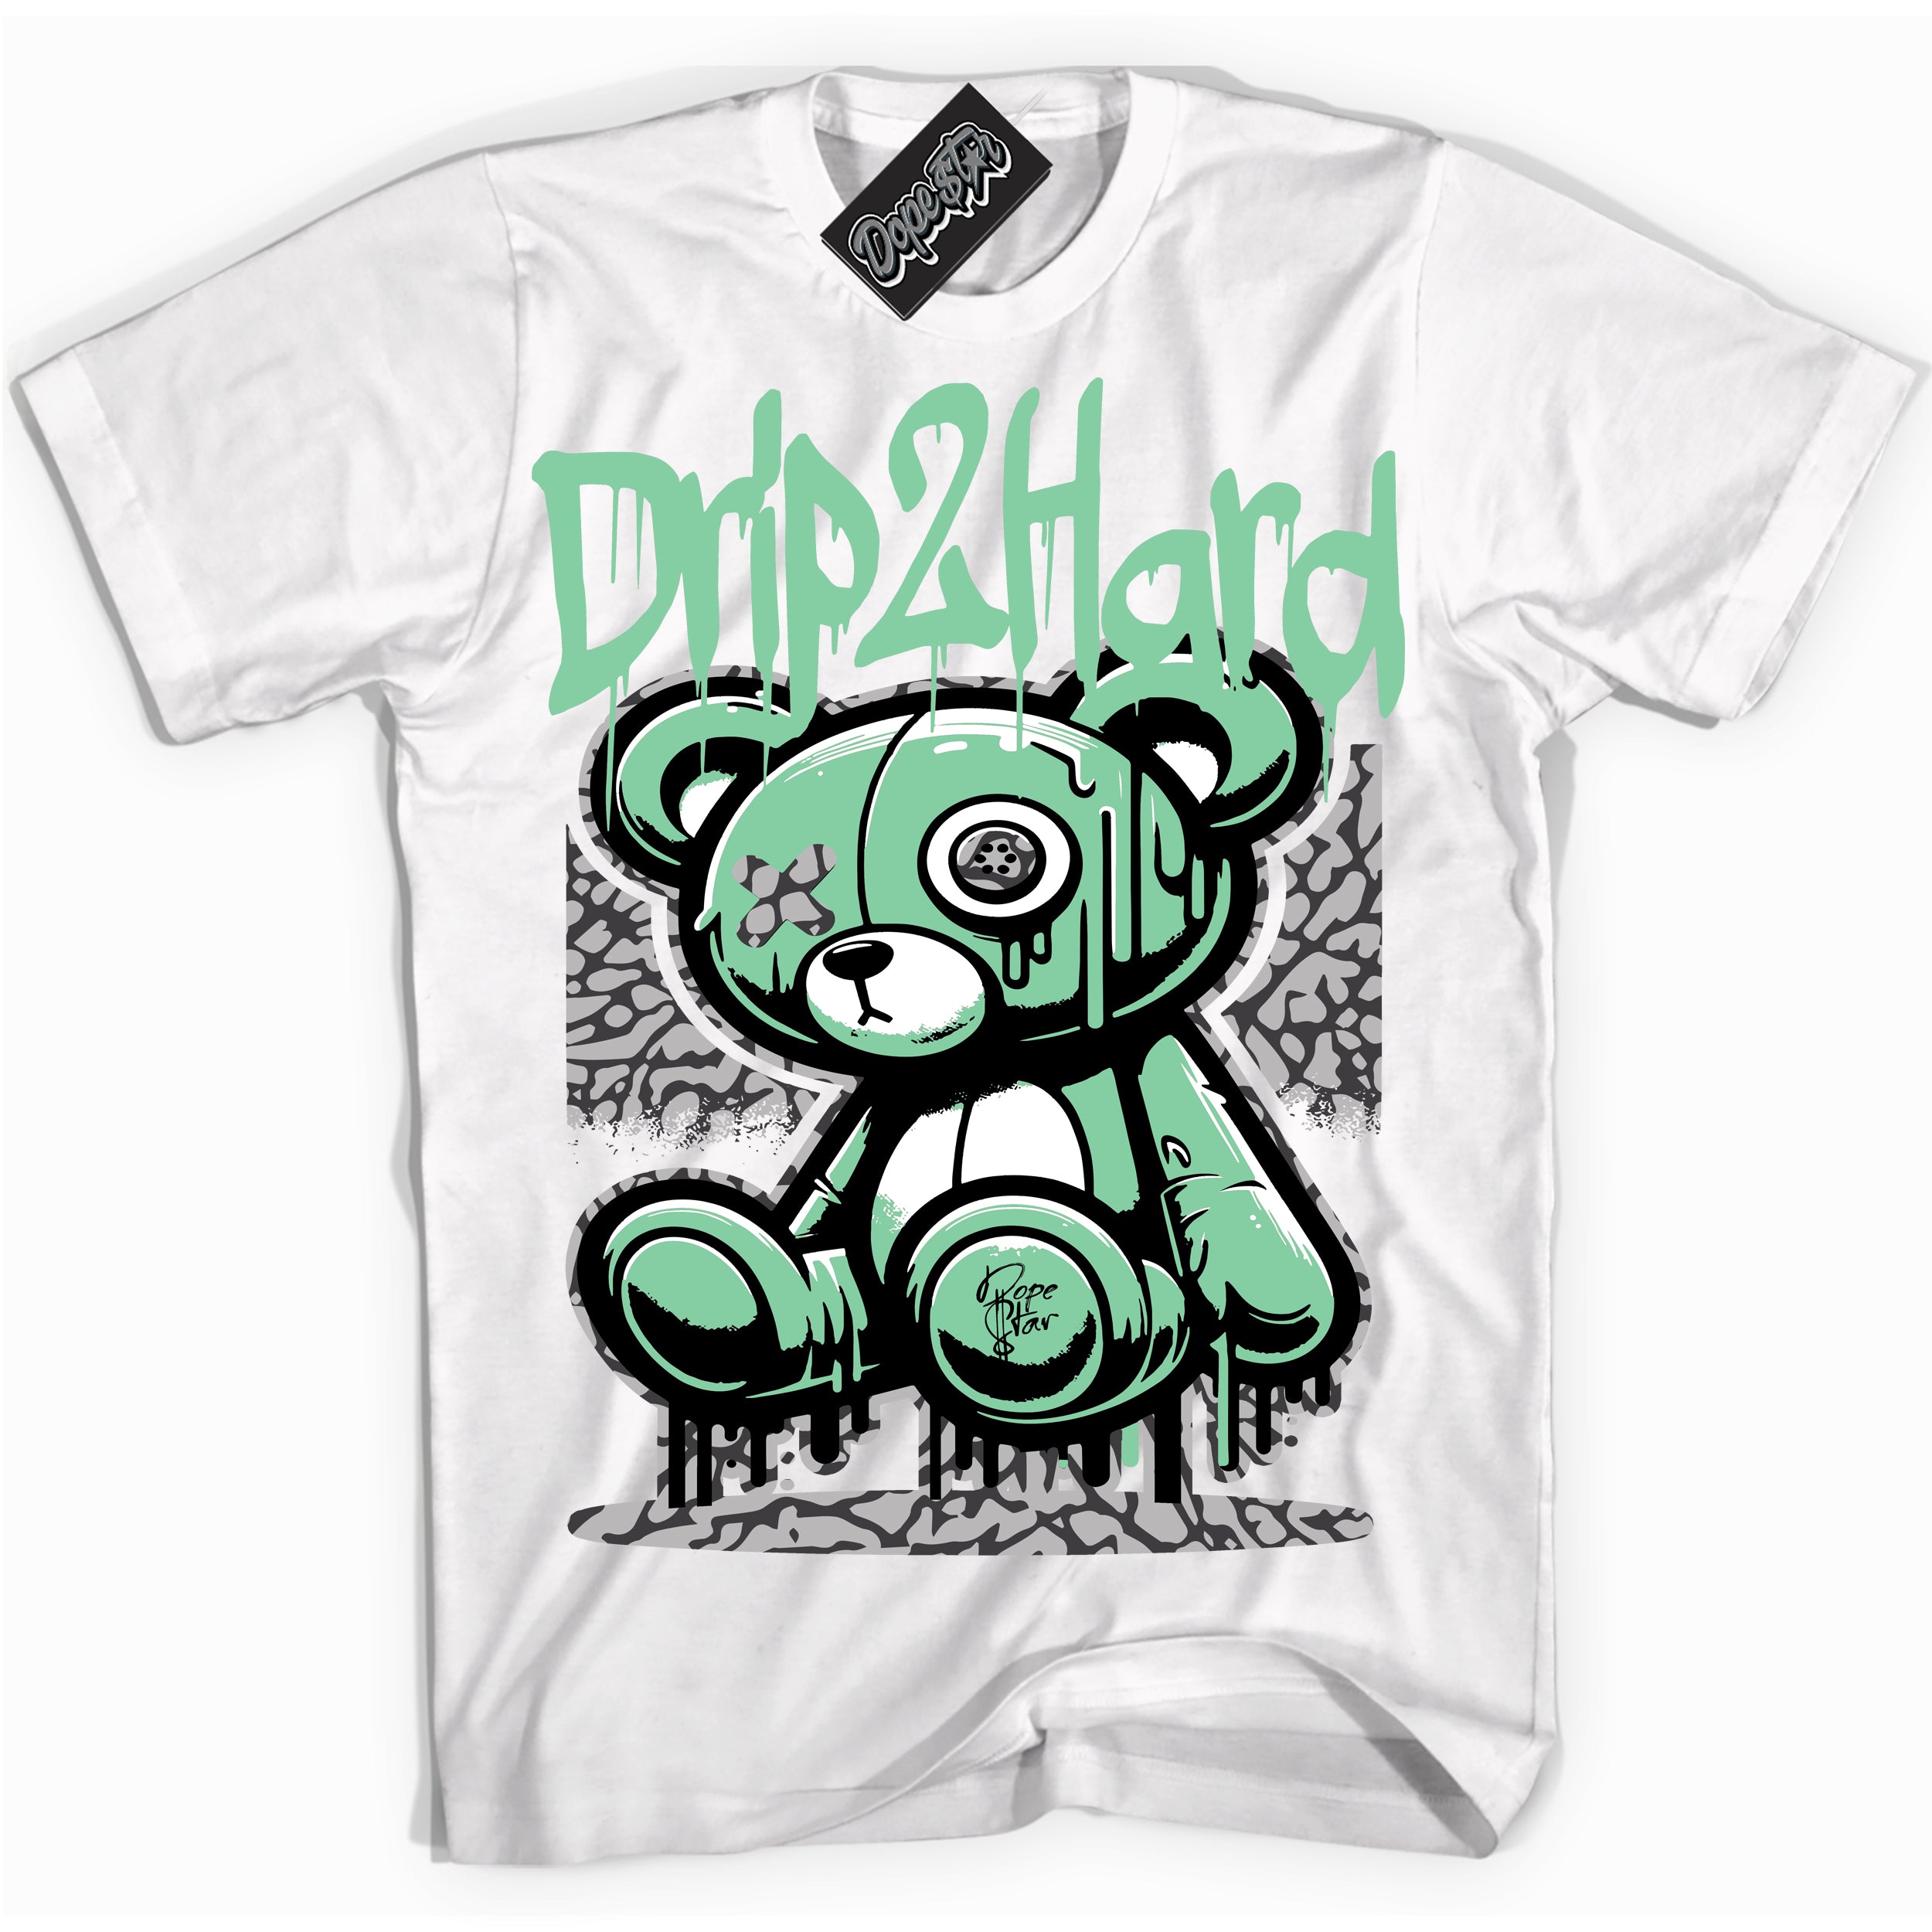 Cool White graphic tee with “ Drip 2 Hard” design, that perfectly matches Green Glow 3s sneakers 